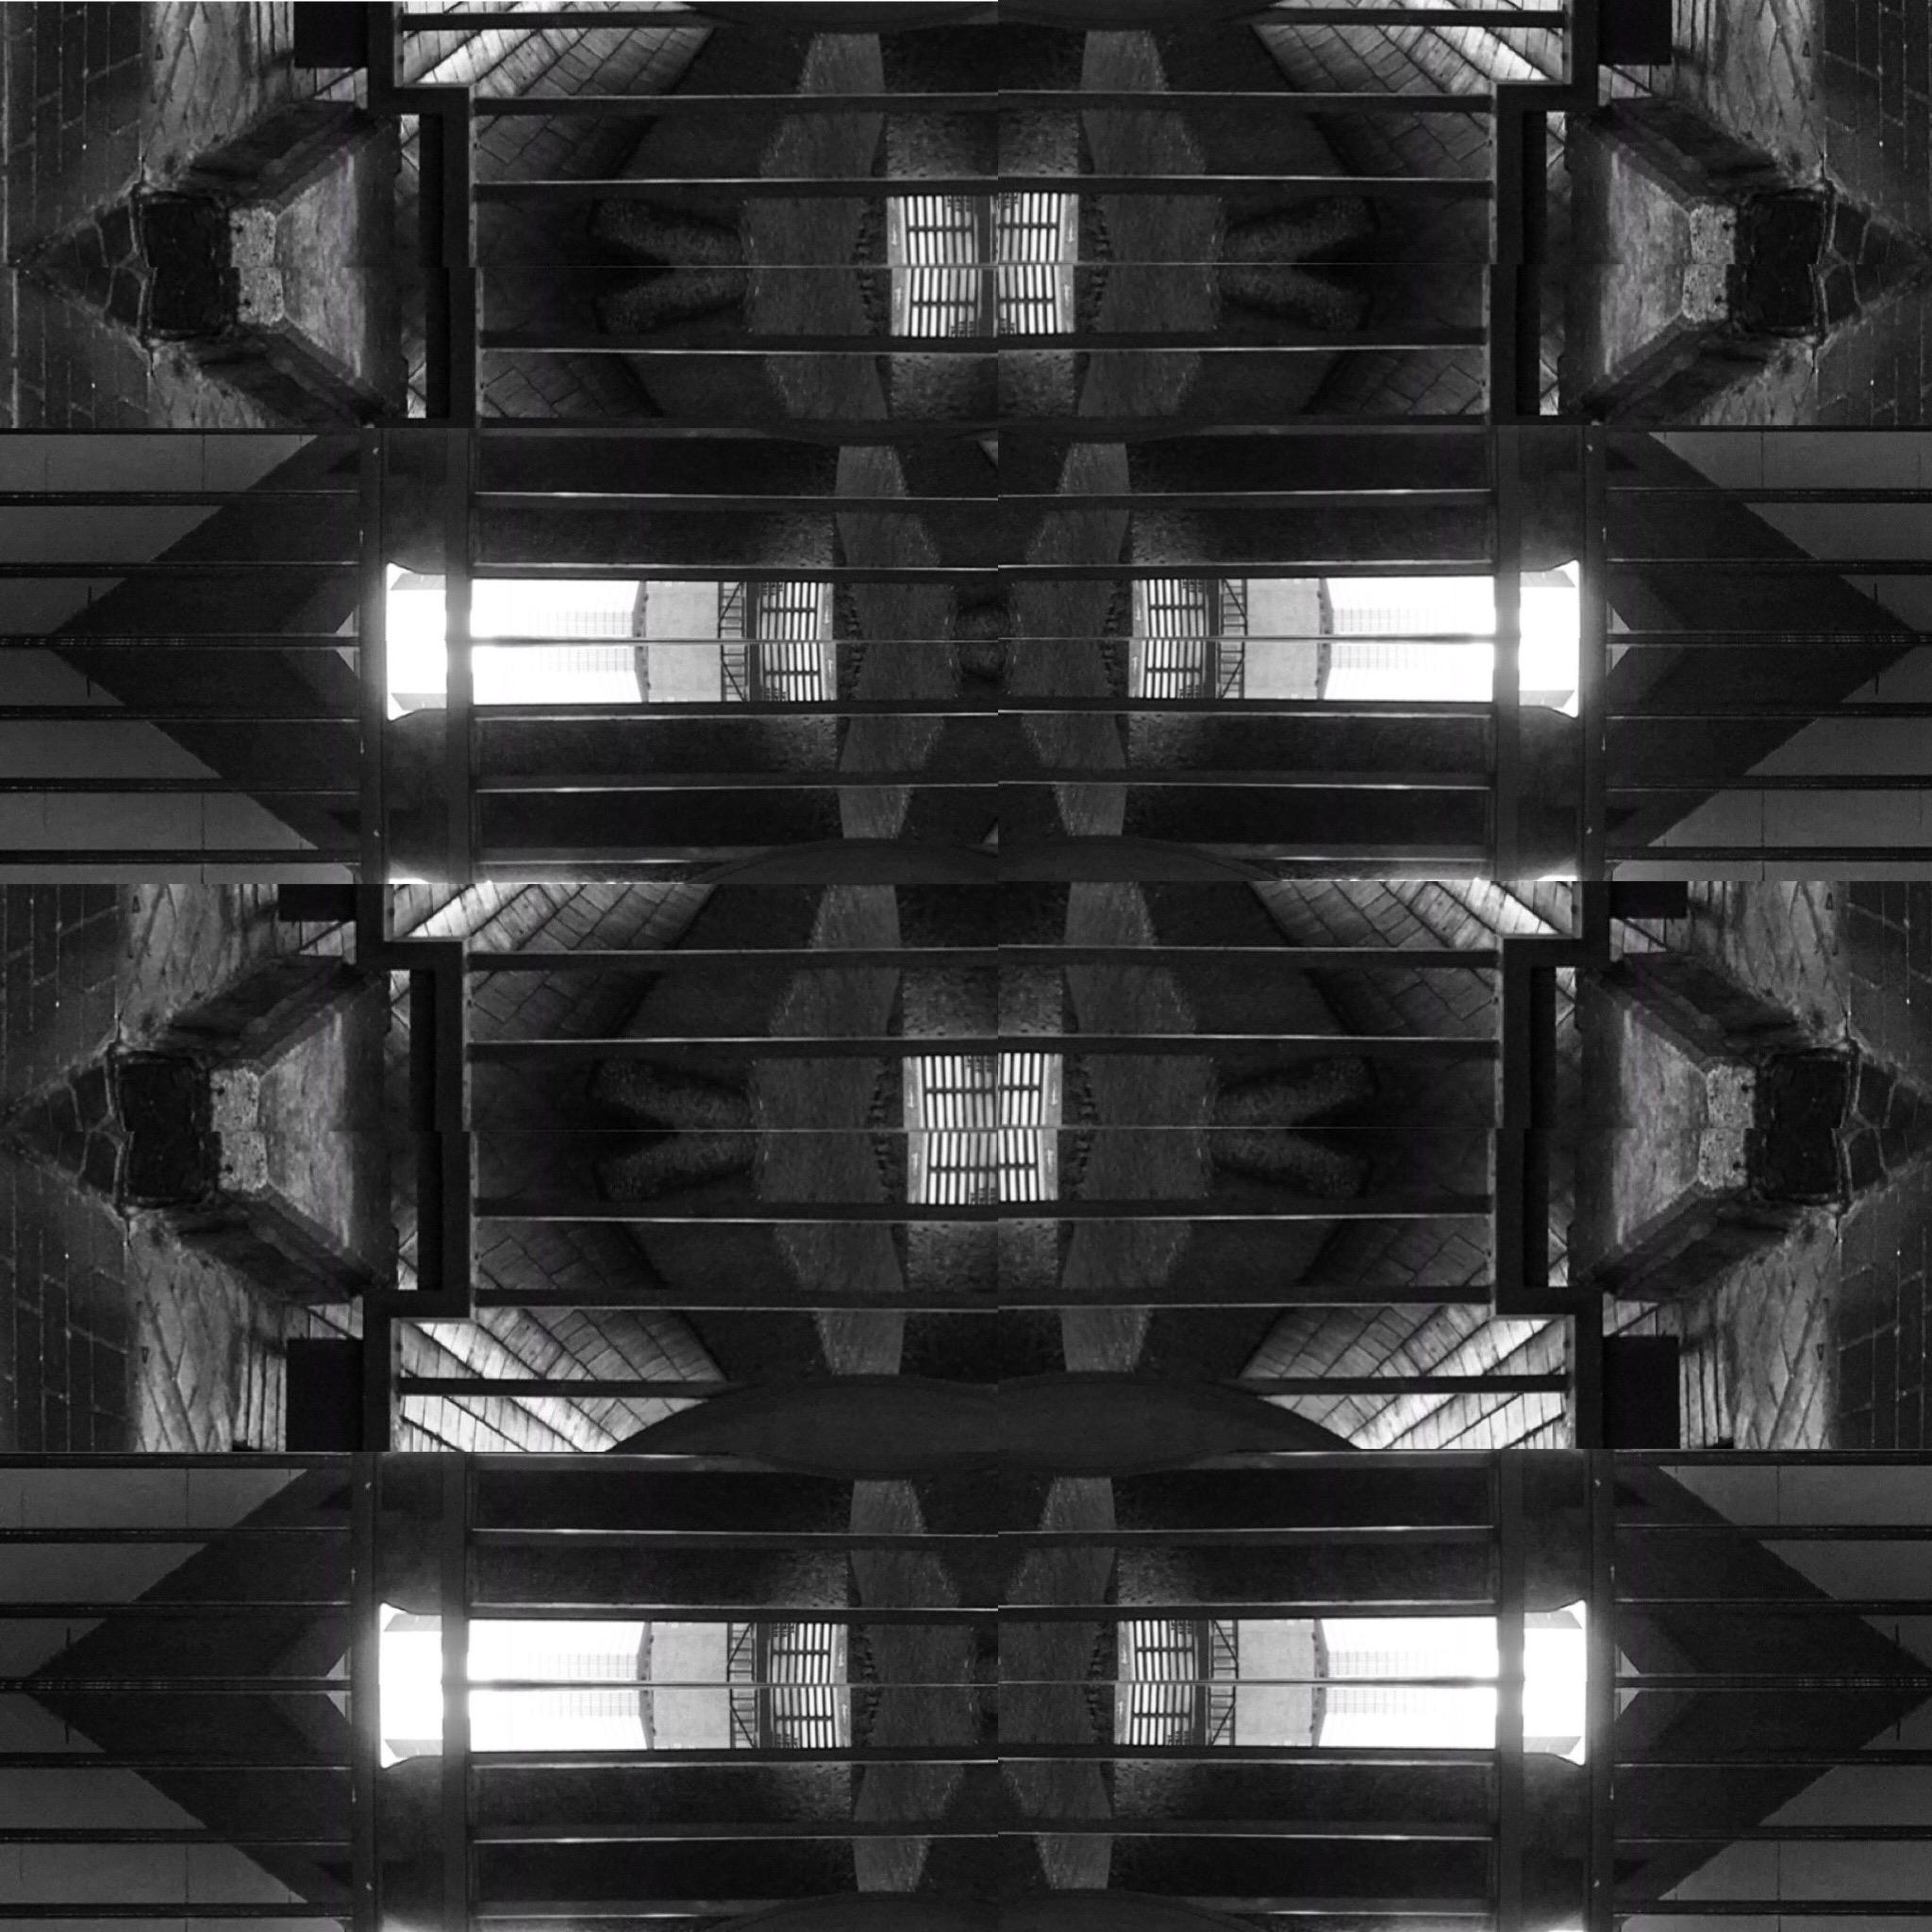 "The Barbican Centre of London photomontages by Hsu show no longer a space of unity and yet, we get lost in it. The carved self-portraits of Hsu are split up. Why do they have multiple faces? It looks like Hsu sees her breaks in the brutalist